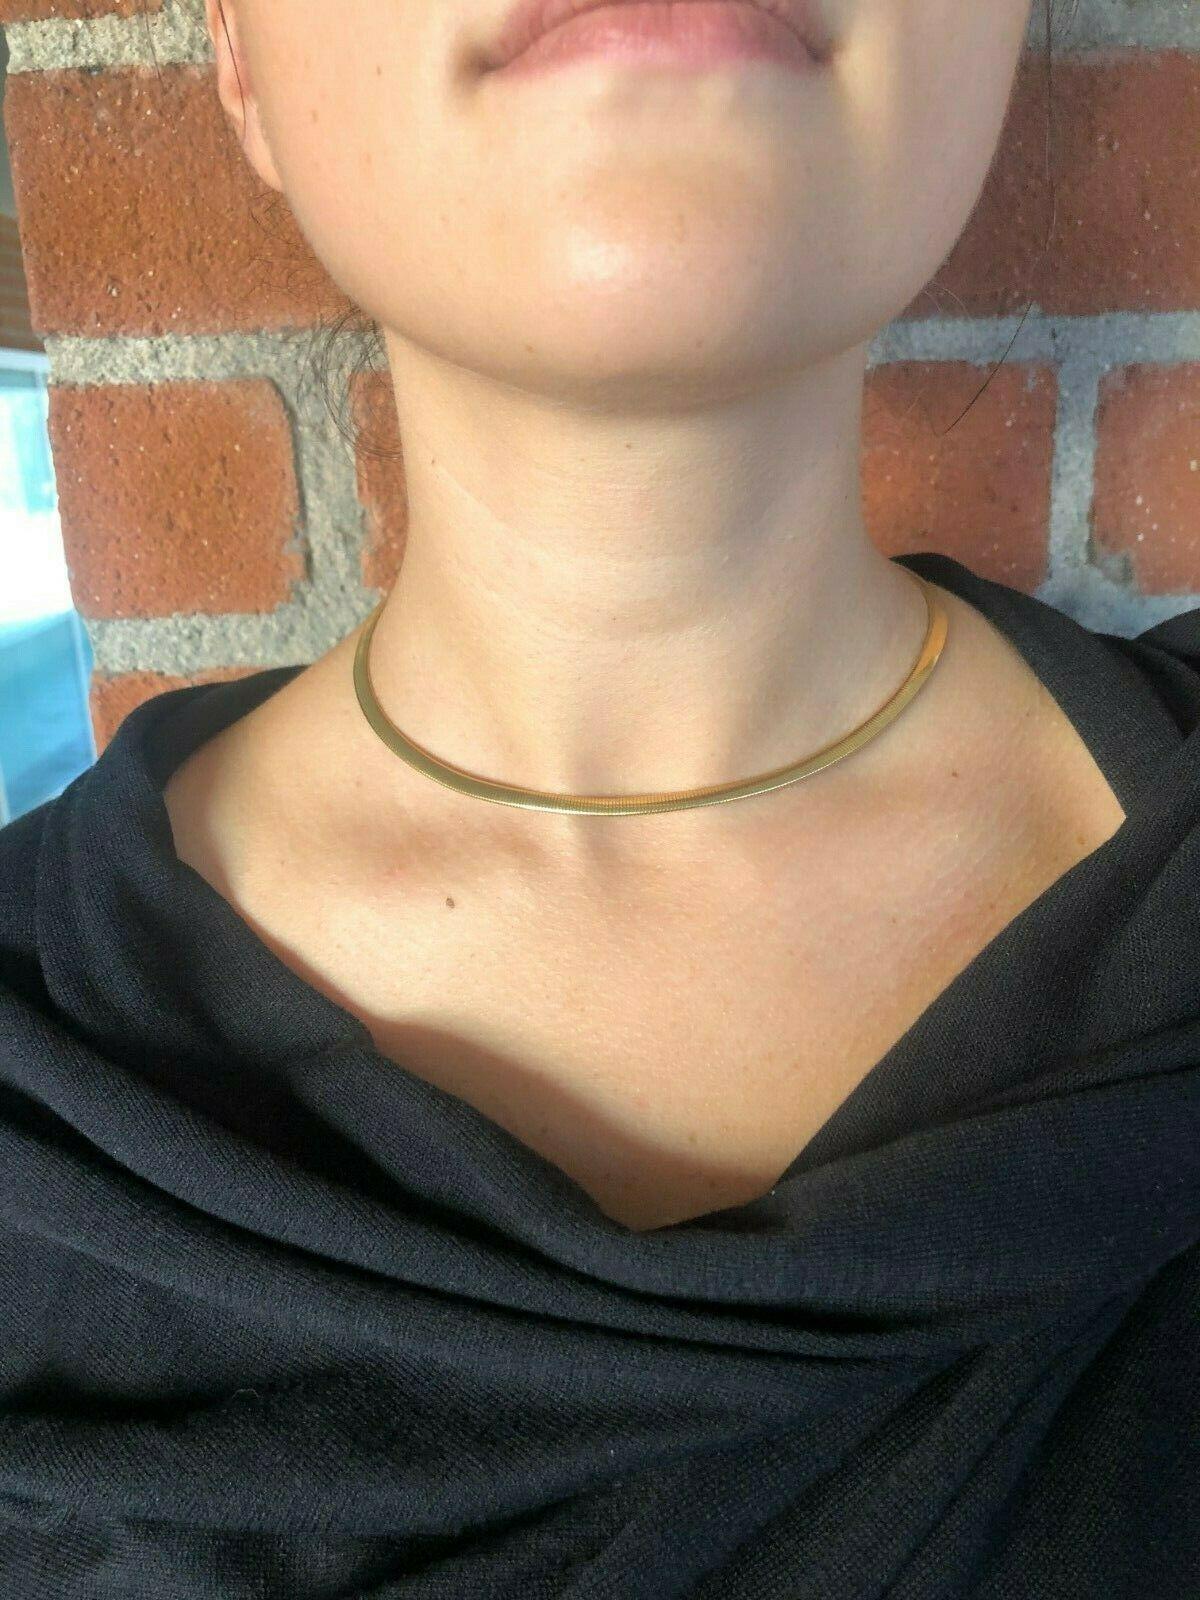 Simple elegance and iconic Snake design from Van Cleef & Arpels, circa 1970s. Made of polished 18k gold.
Perfect for layering or wearing by itself - and even as a wrap bracelet as you can see on the pic. 
Features a loop inside to hang a charm or